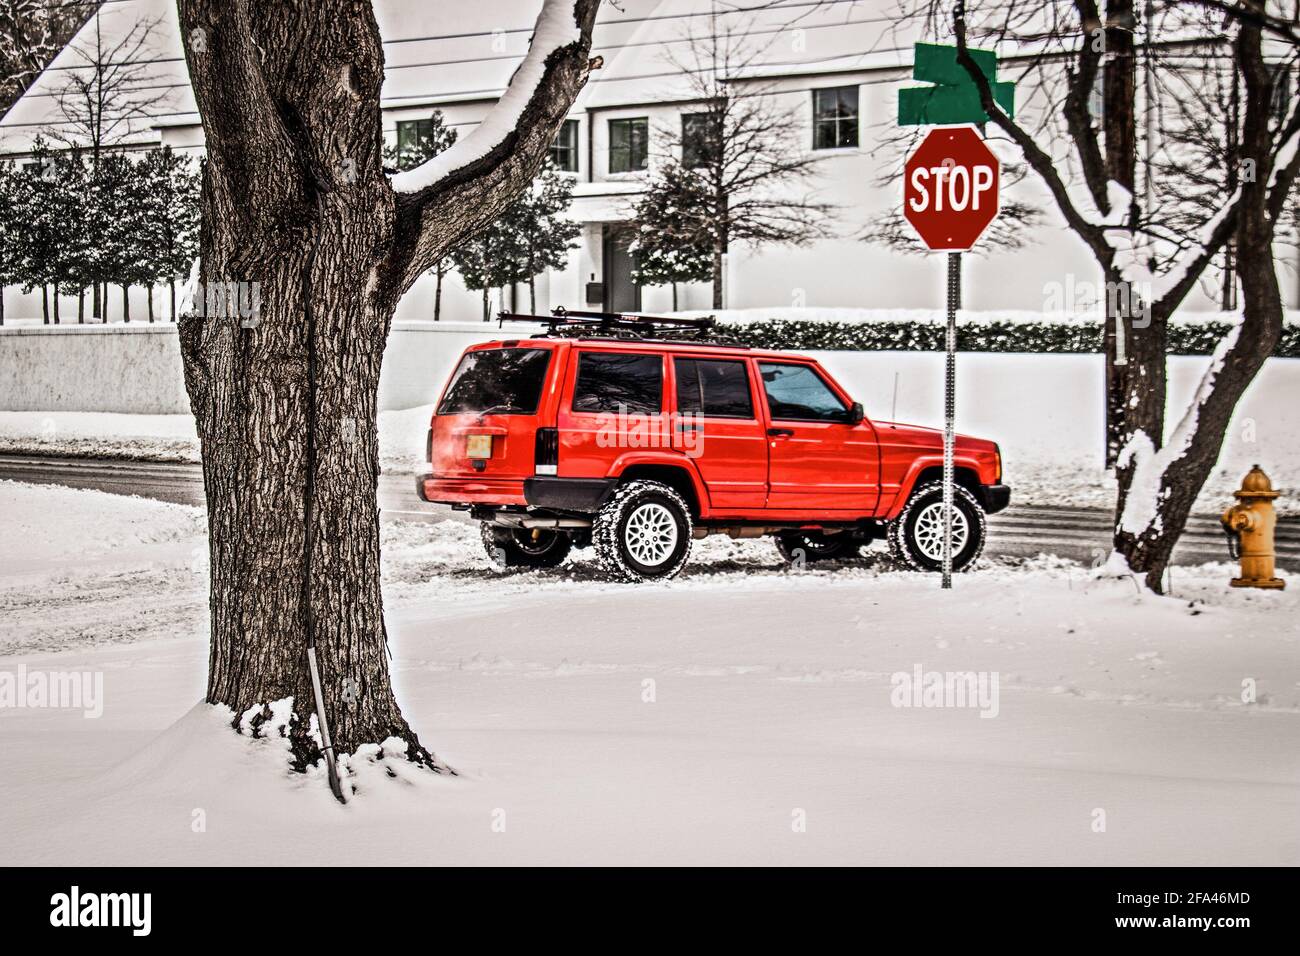 Four wheel drive SUV stopped at stop sign on snowy day getting ready to turn onto cleared roat from road in upscale neighborhood. Stock Photo